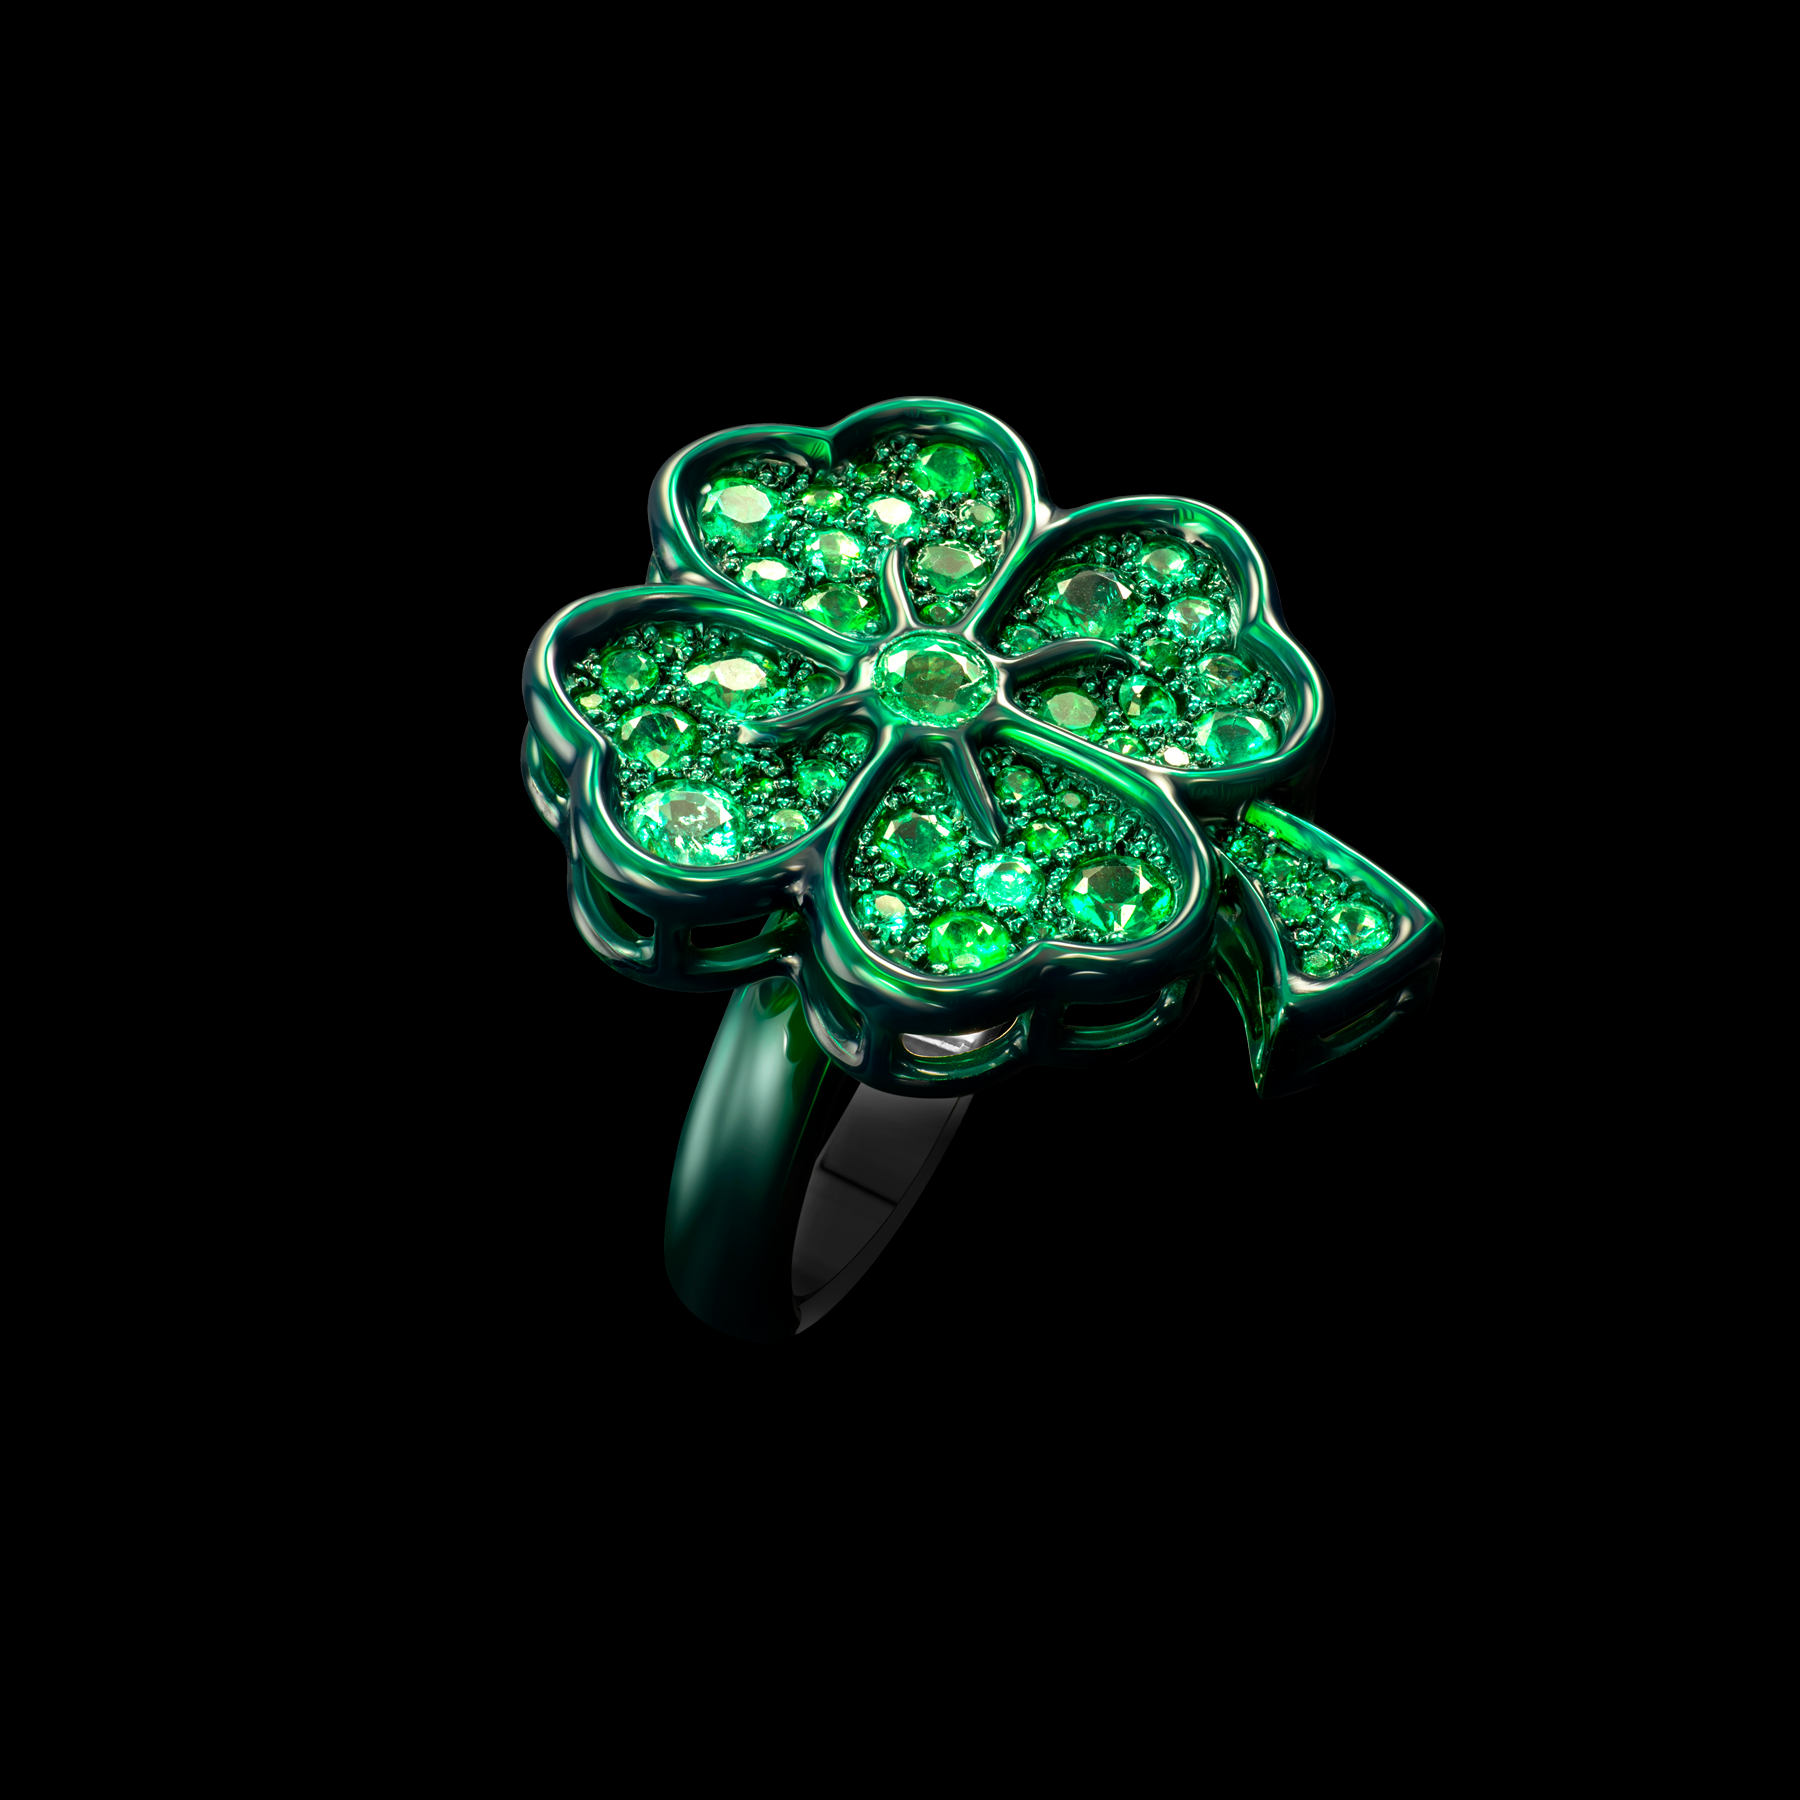 The Lucky ring by designer Solange Azagury-Partridge - Blackened 18k White Gold, Ceramic and Enamel, Emeralds - front view 0